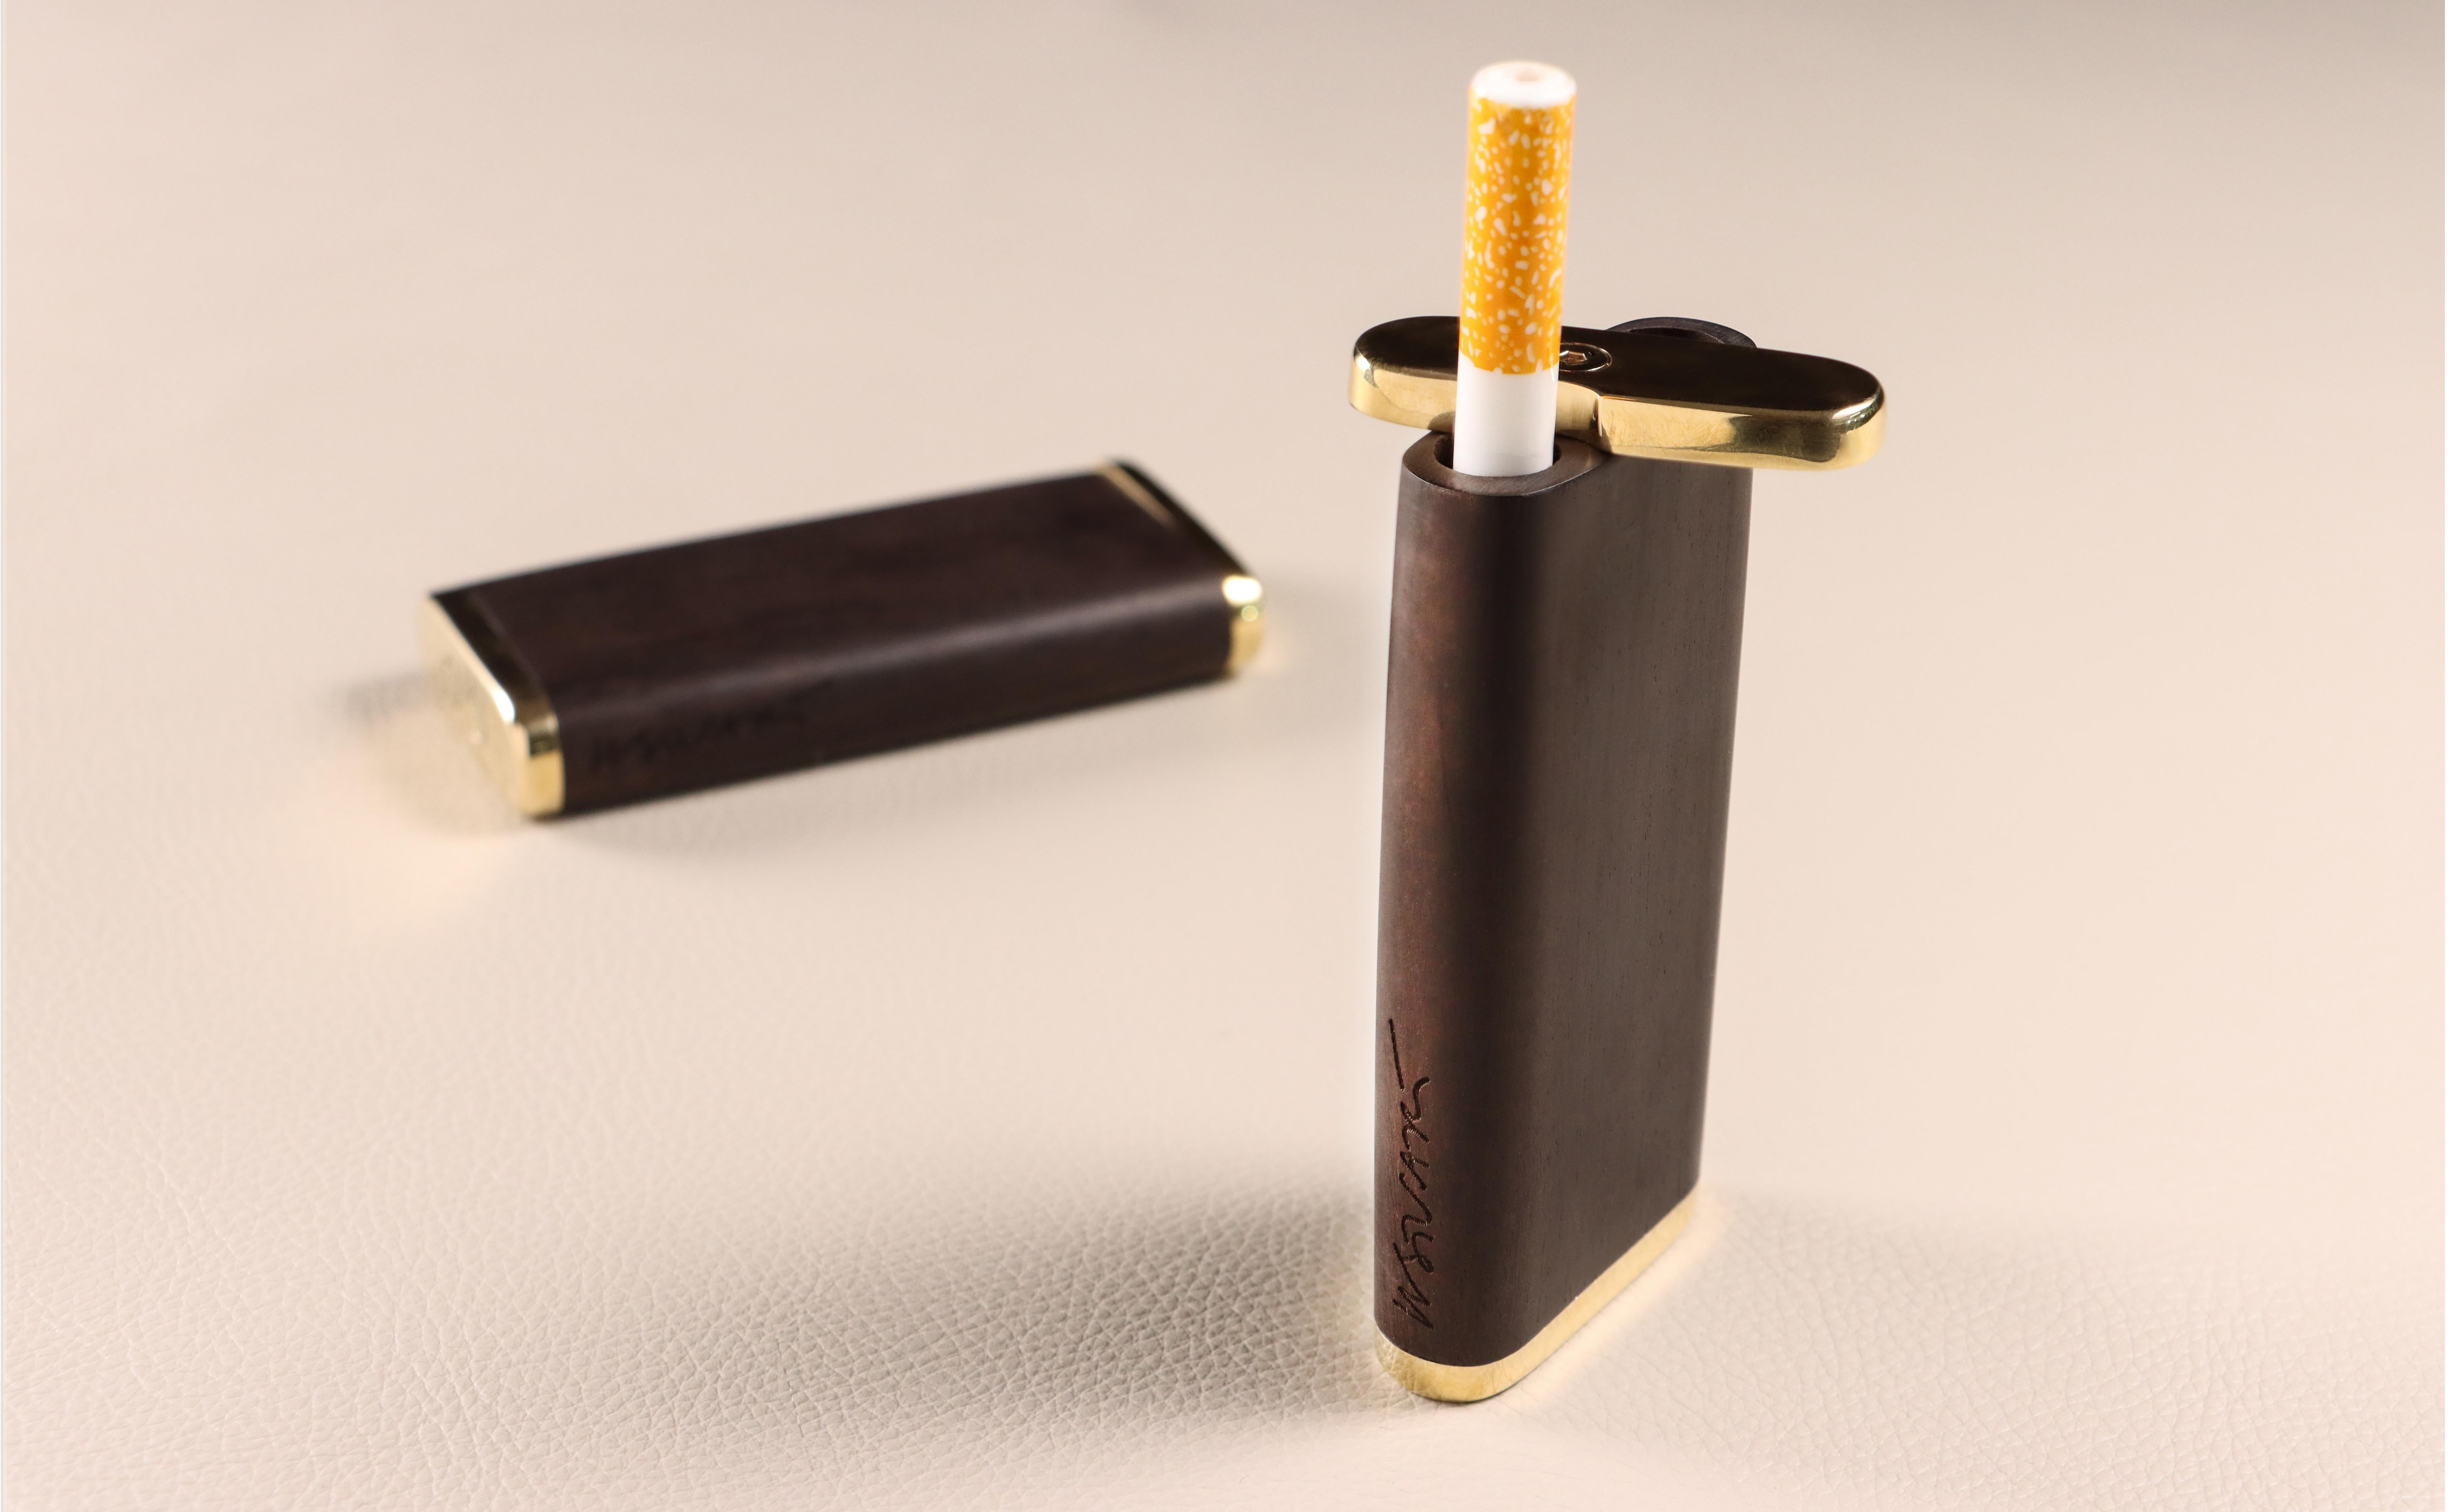 Luxury Ebony Wood and Bronze Dugout with One Hitter by William Stuart for Costantini Design

3.75